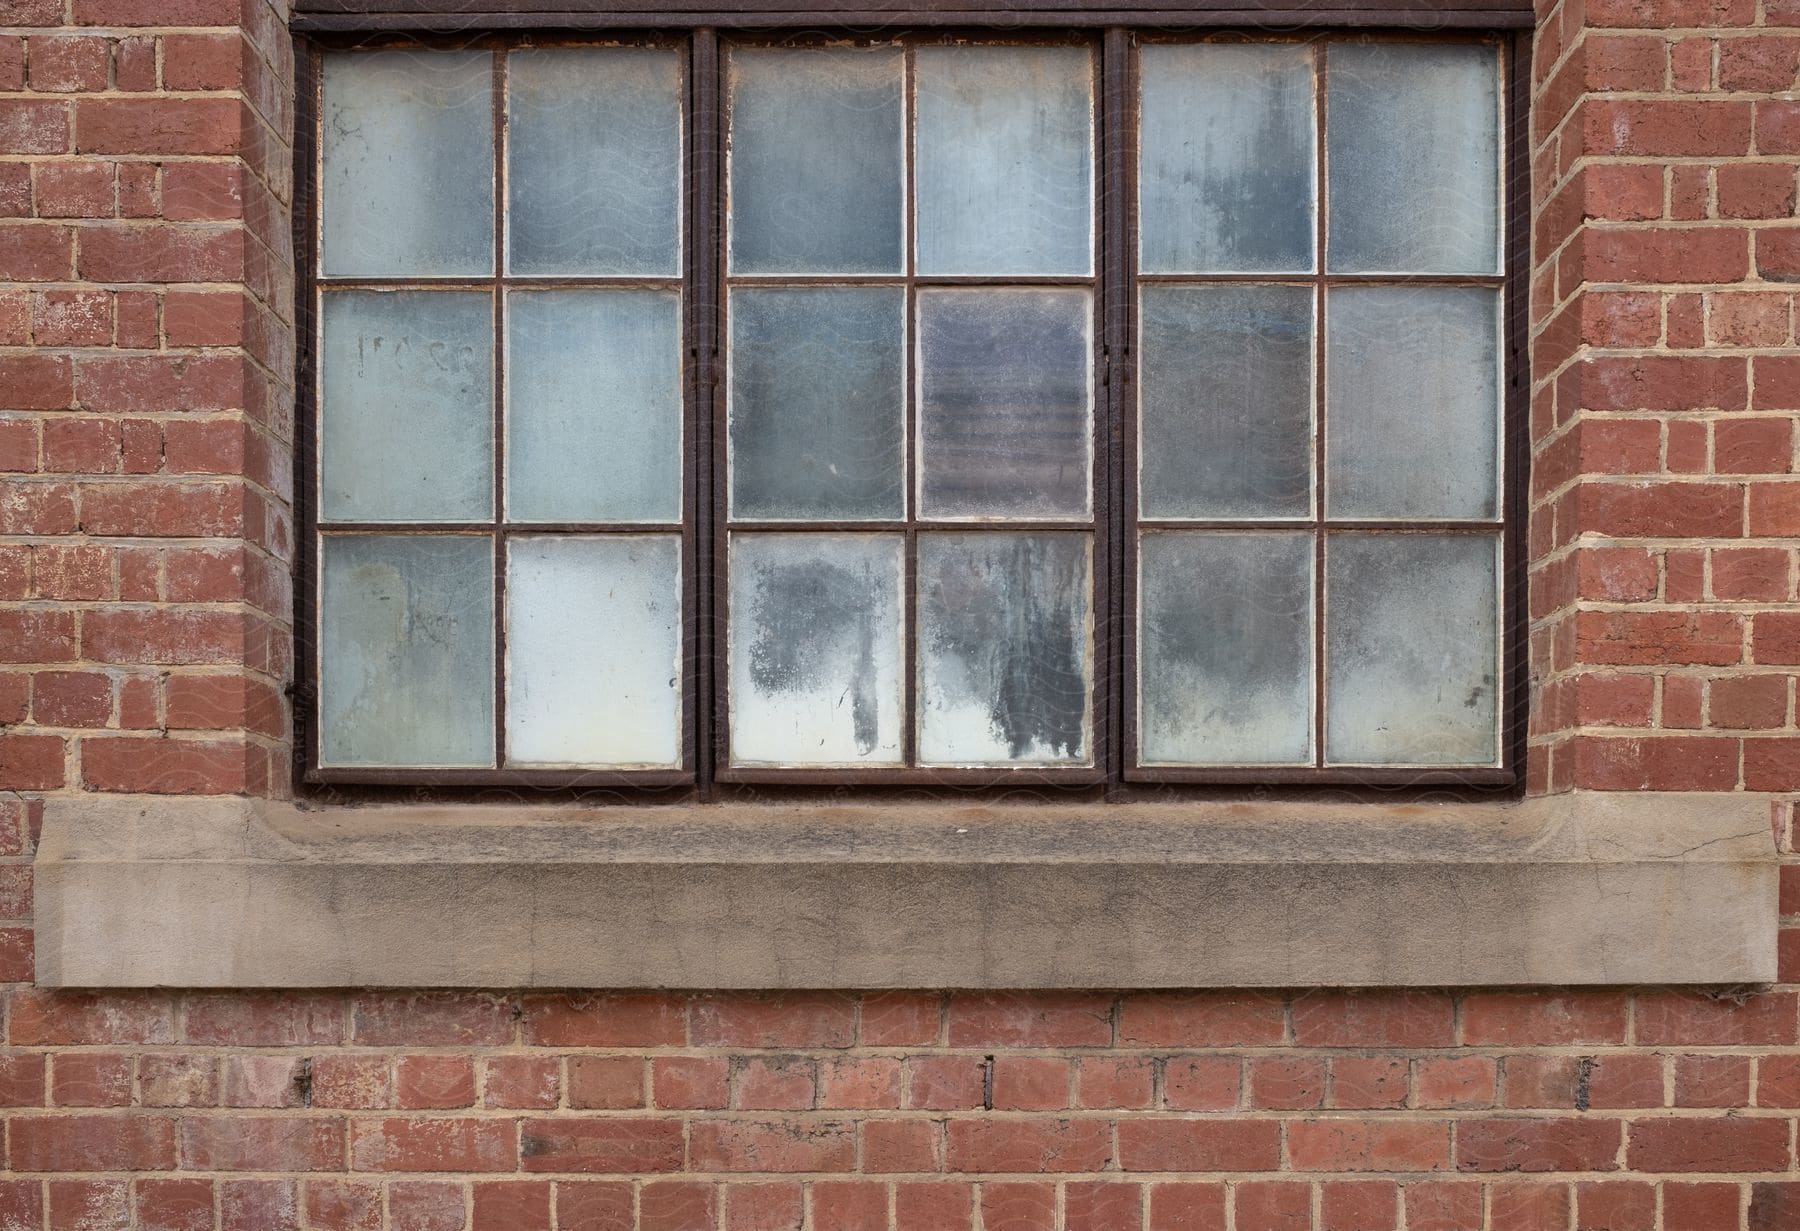 A glass window that is frosted and dirty in an orange brick wall